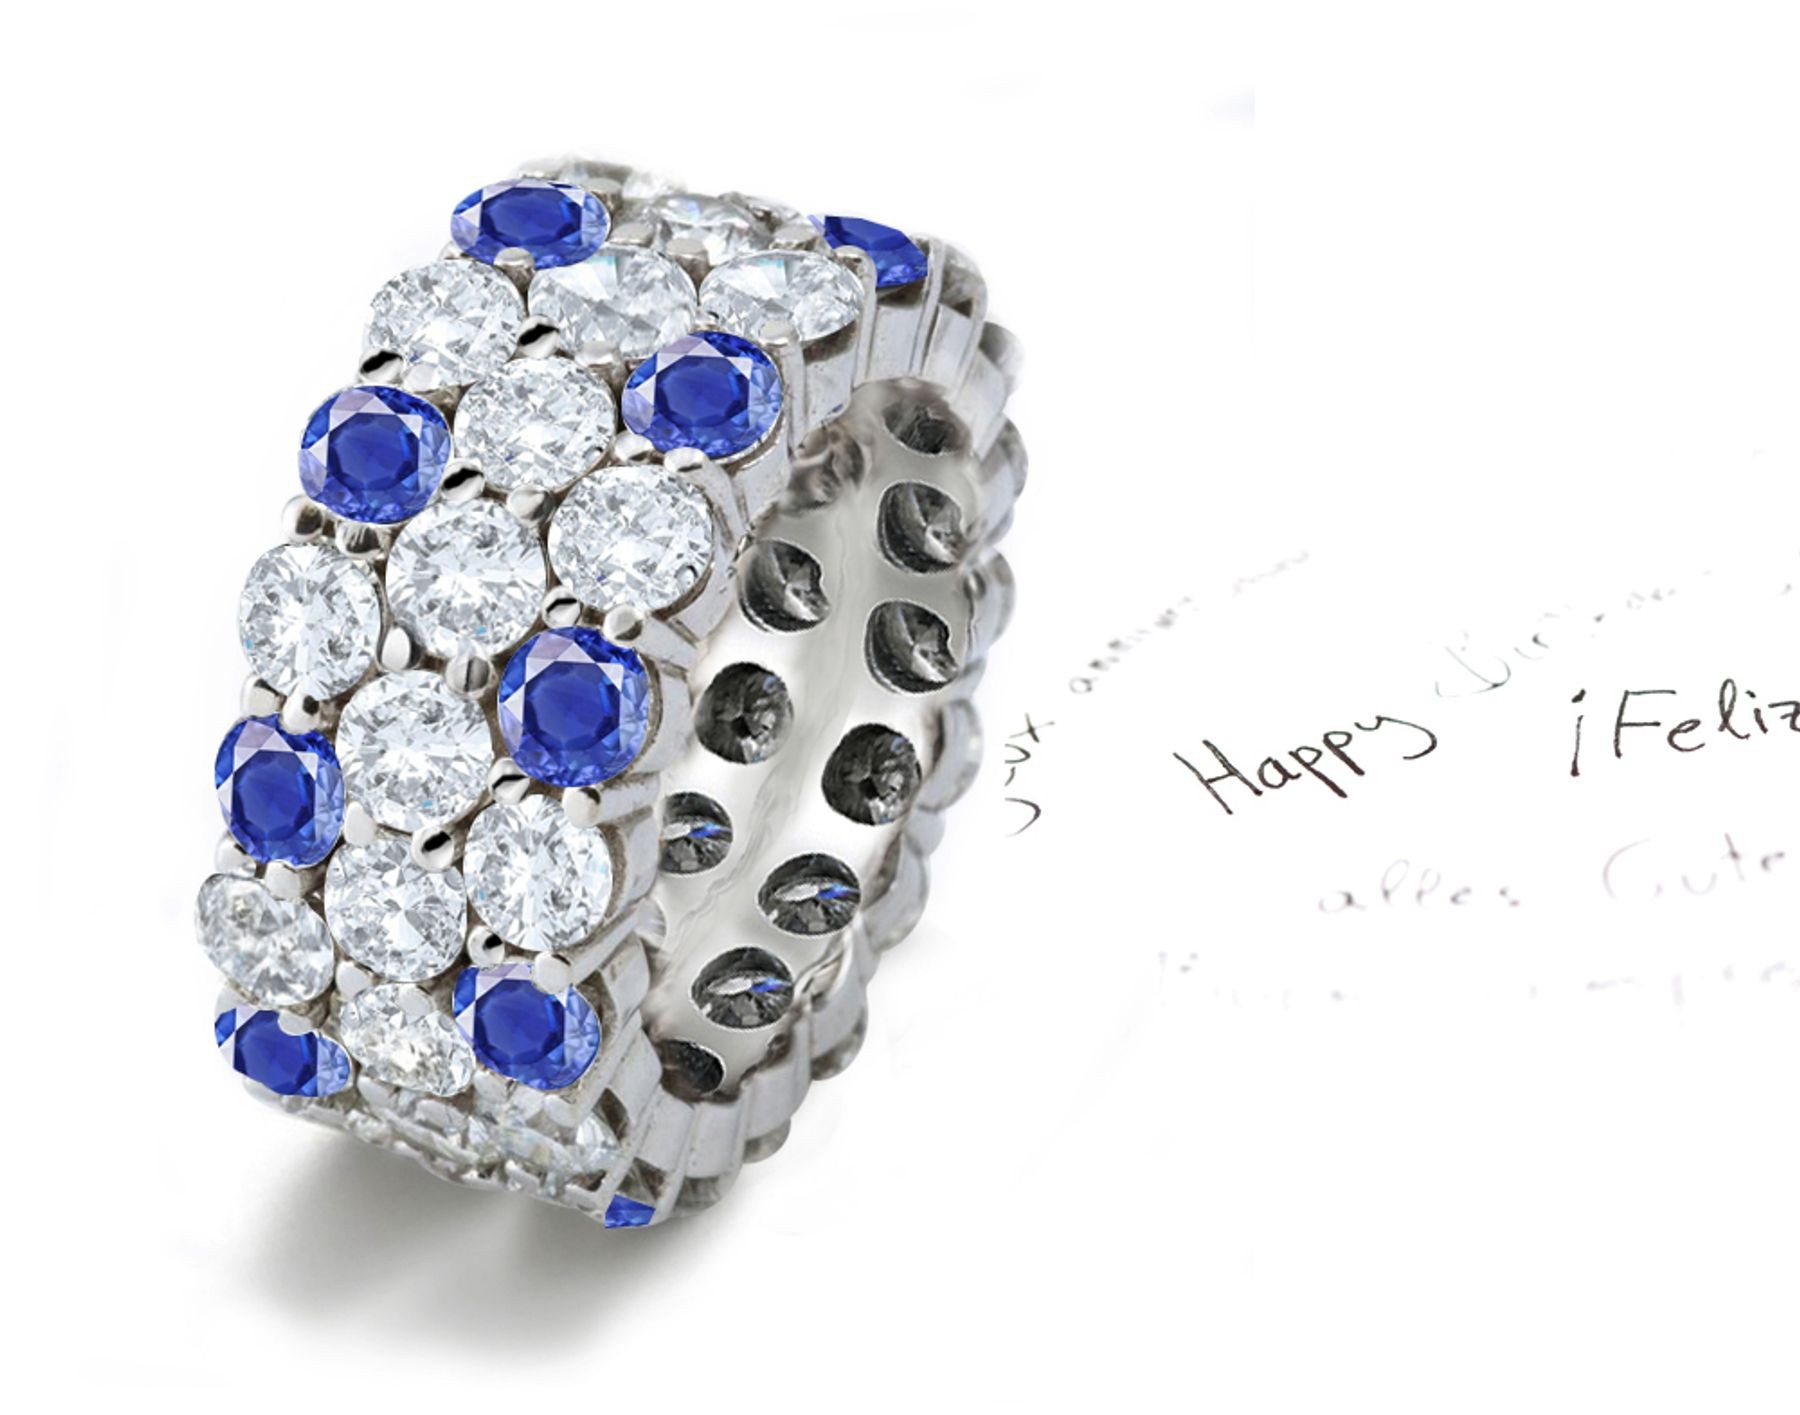 Huge Diamond Sapphire Ring Featuring 3 Prong Set Ring in 14k Gold